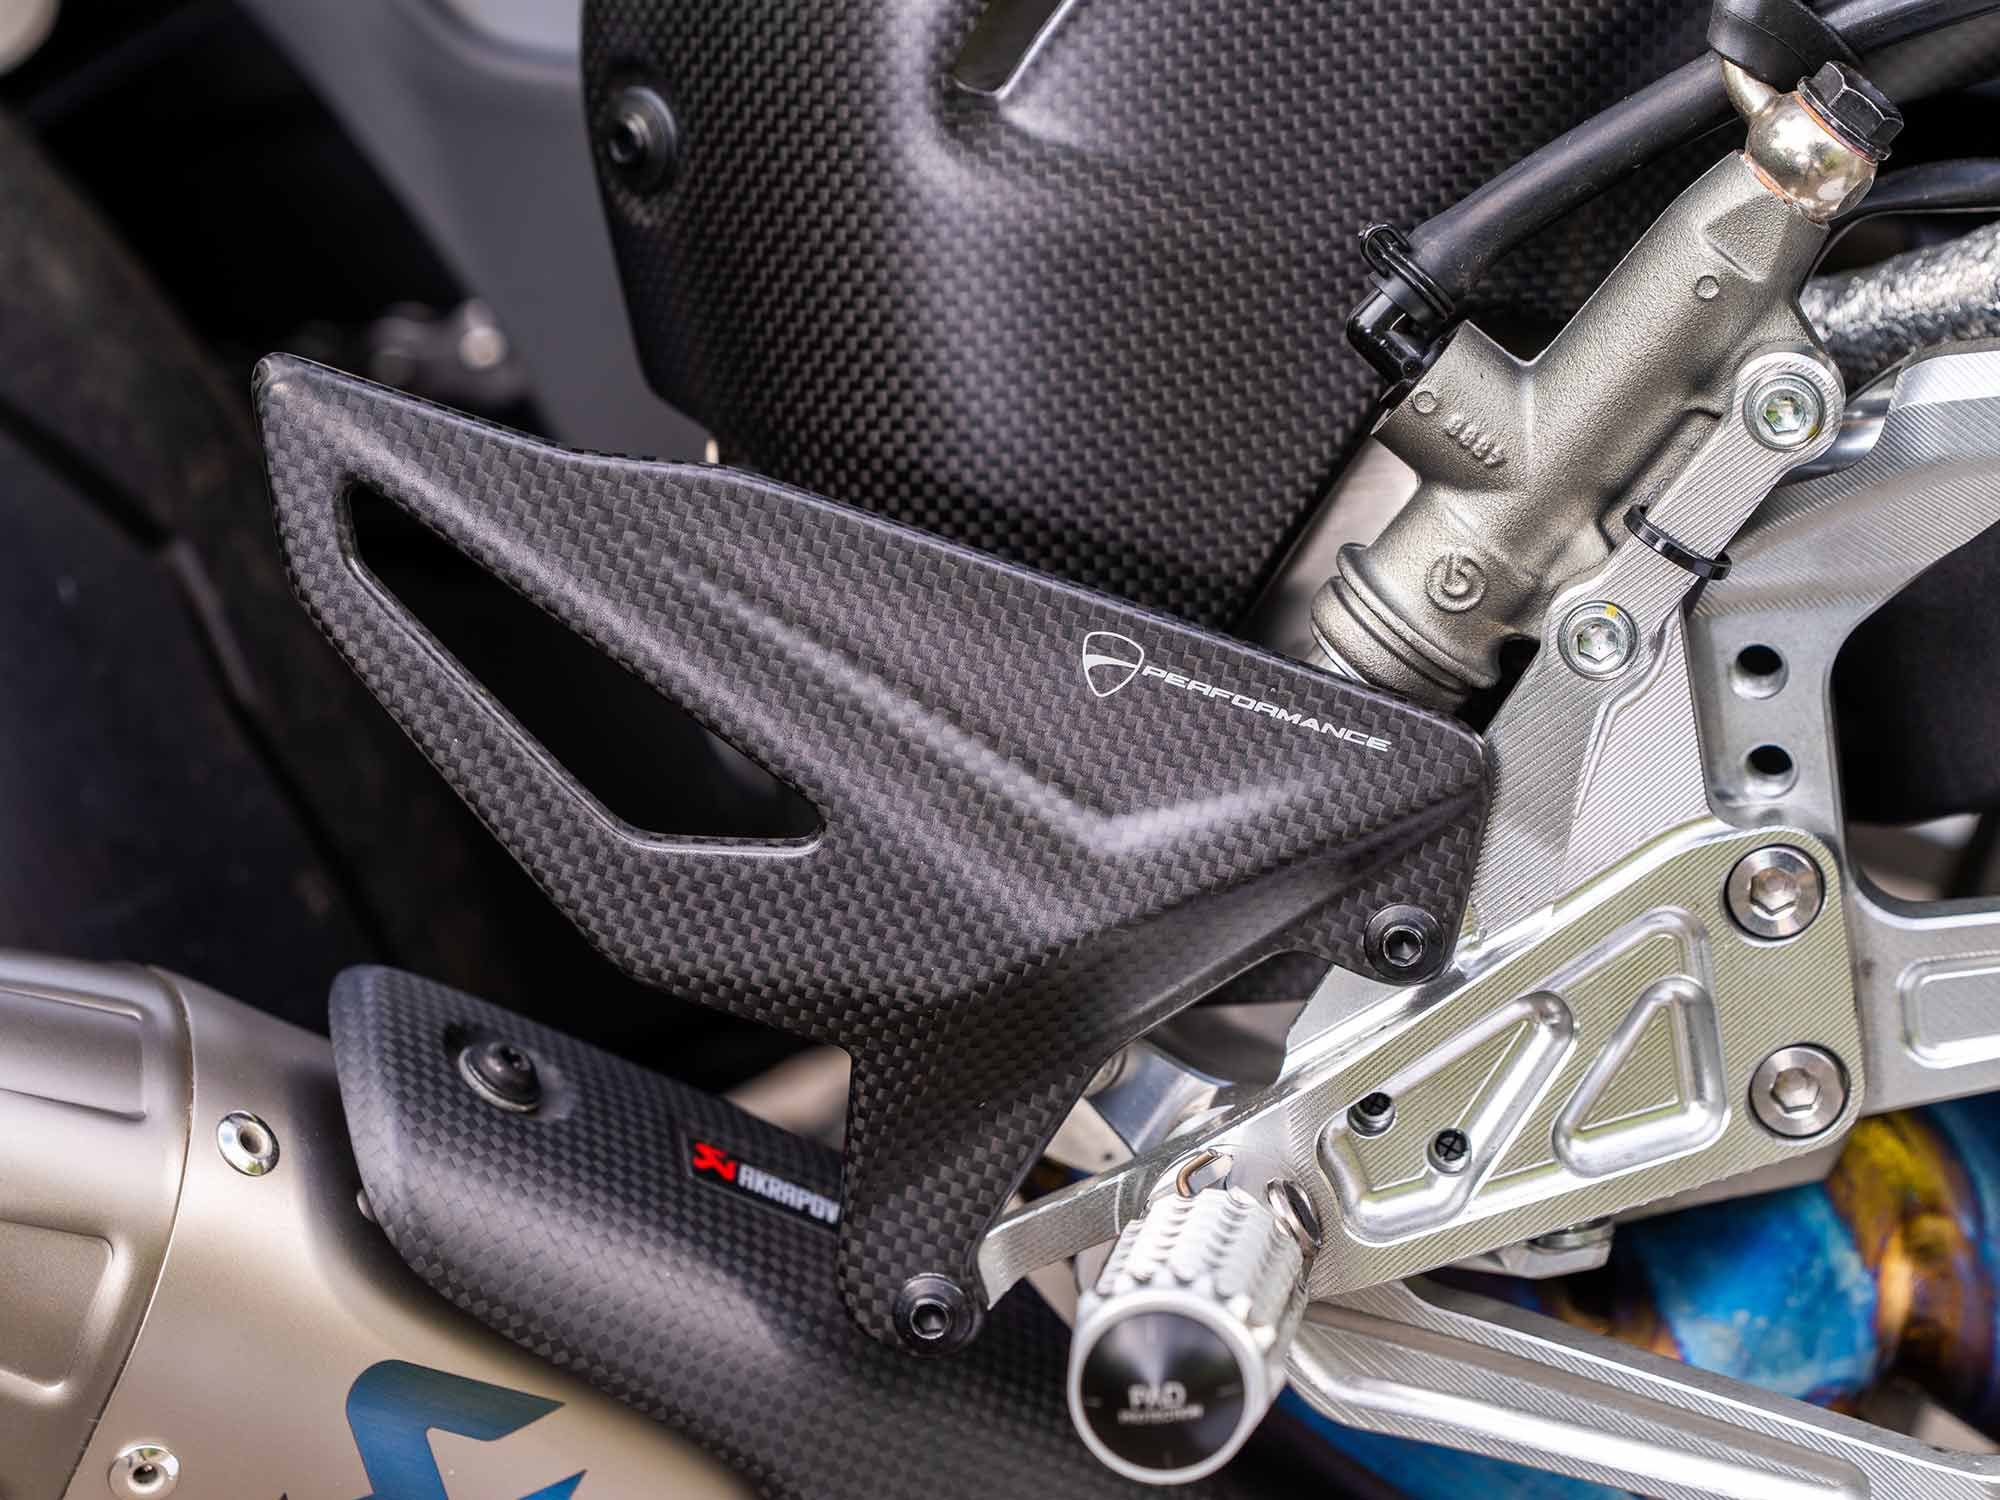 The intricately machined accessory rearsets are a must-have in our book. We love the added comfort and wide range of adjustment the foot controls afford.